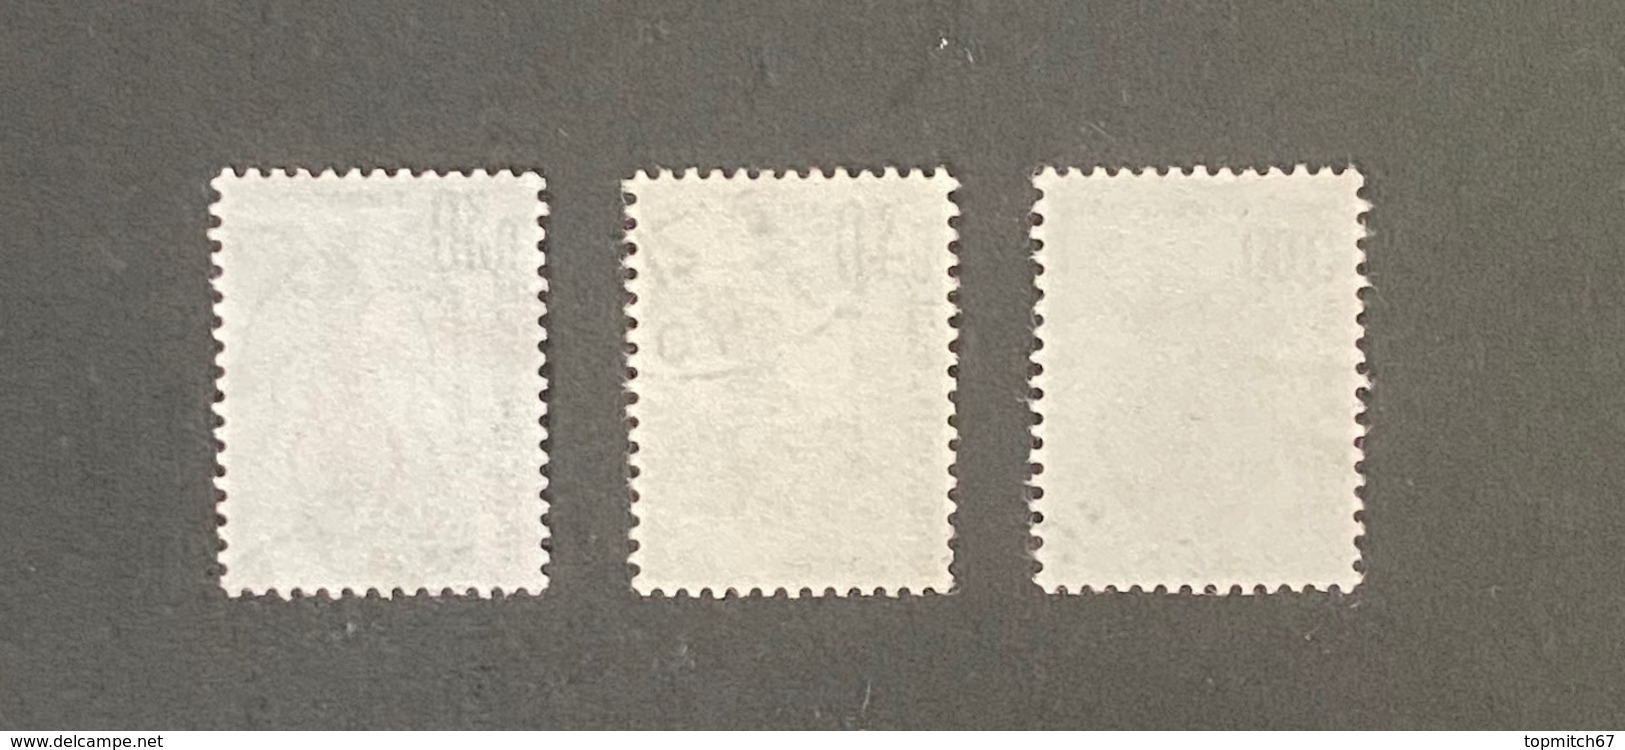 FRAYX109-11U - Timbres Taxe Insectes Coléoptères (I) Set Of 3 Used Stamps 1983 - France YT YX 109-11 - Timbres